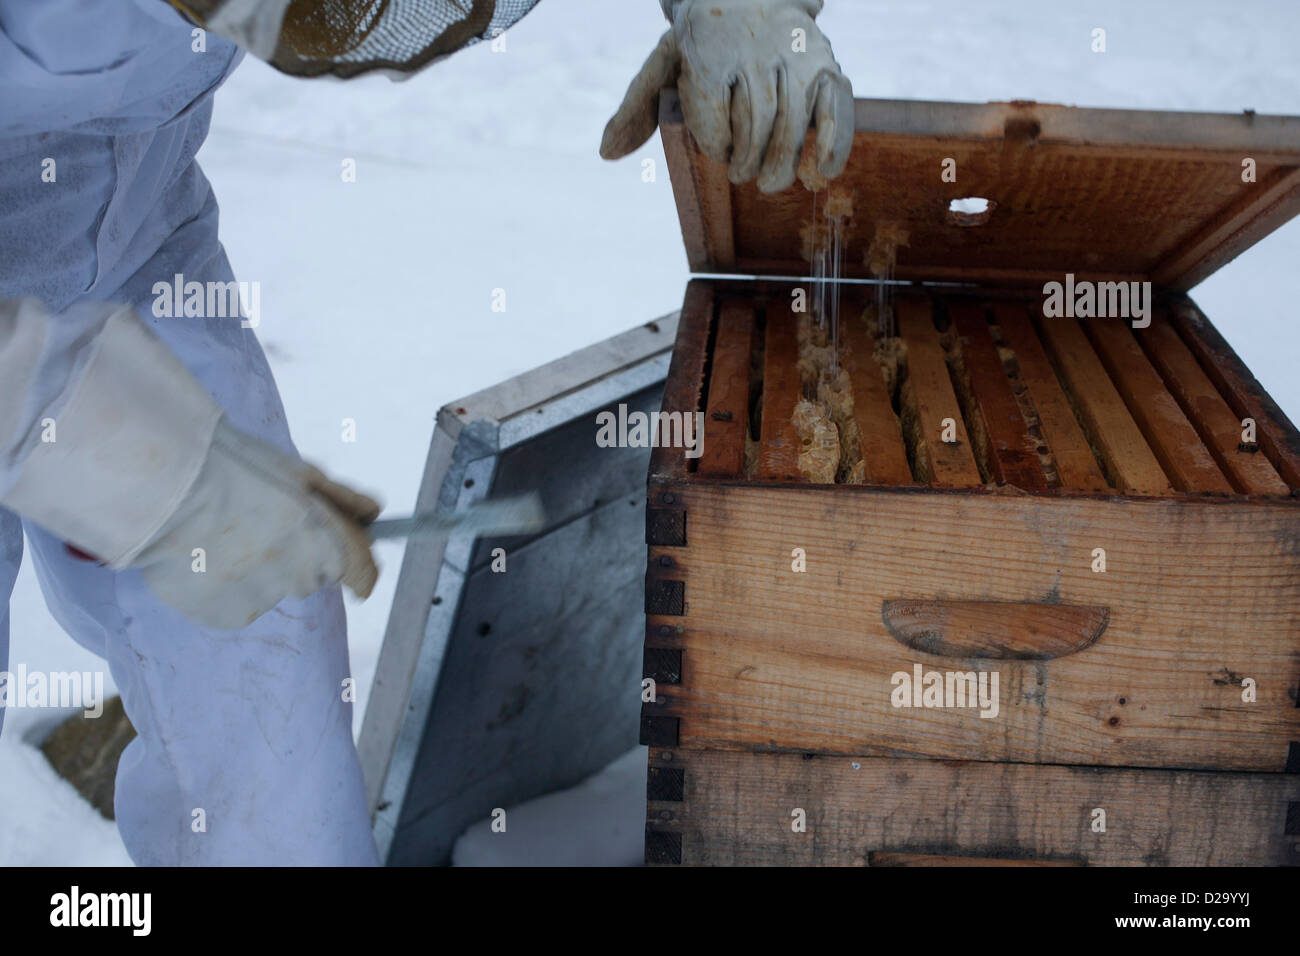 Beekeeper begins to work on hive for winter maintenance, using a hive tool to pry off top. Stock Photo